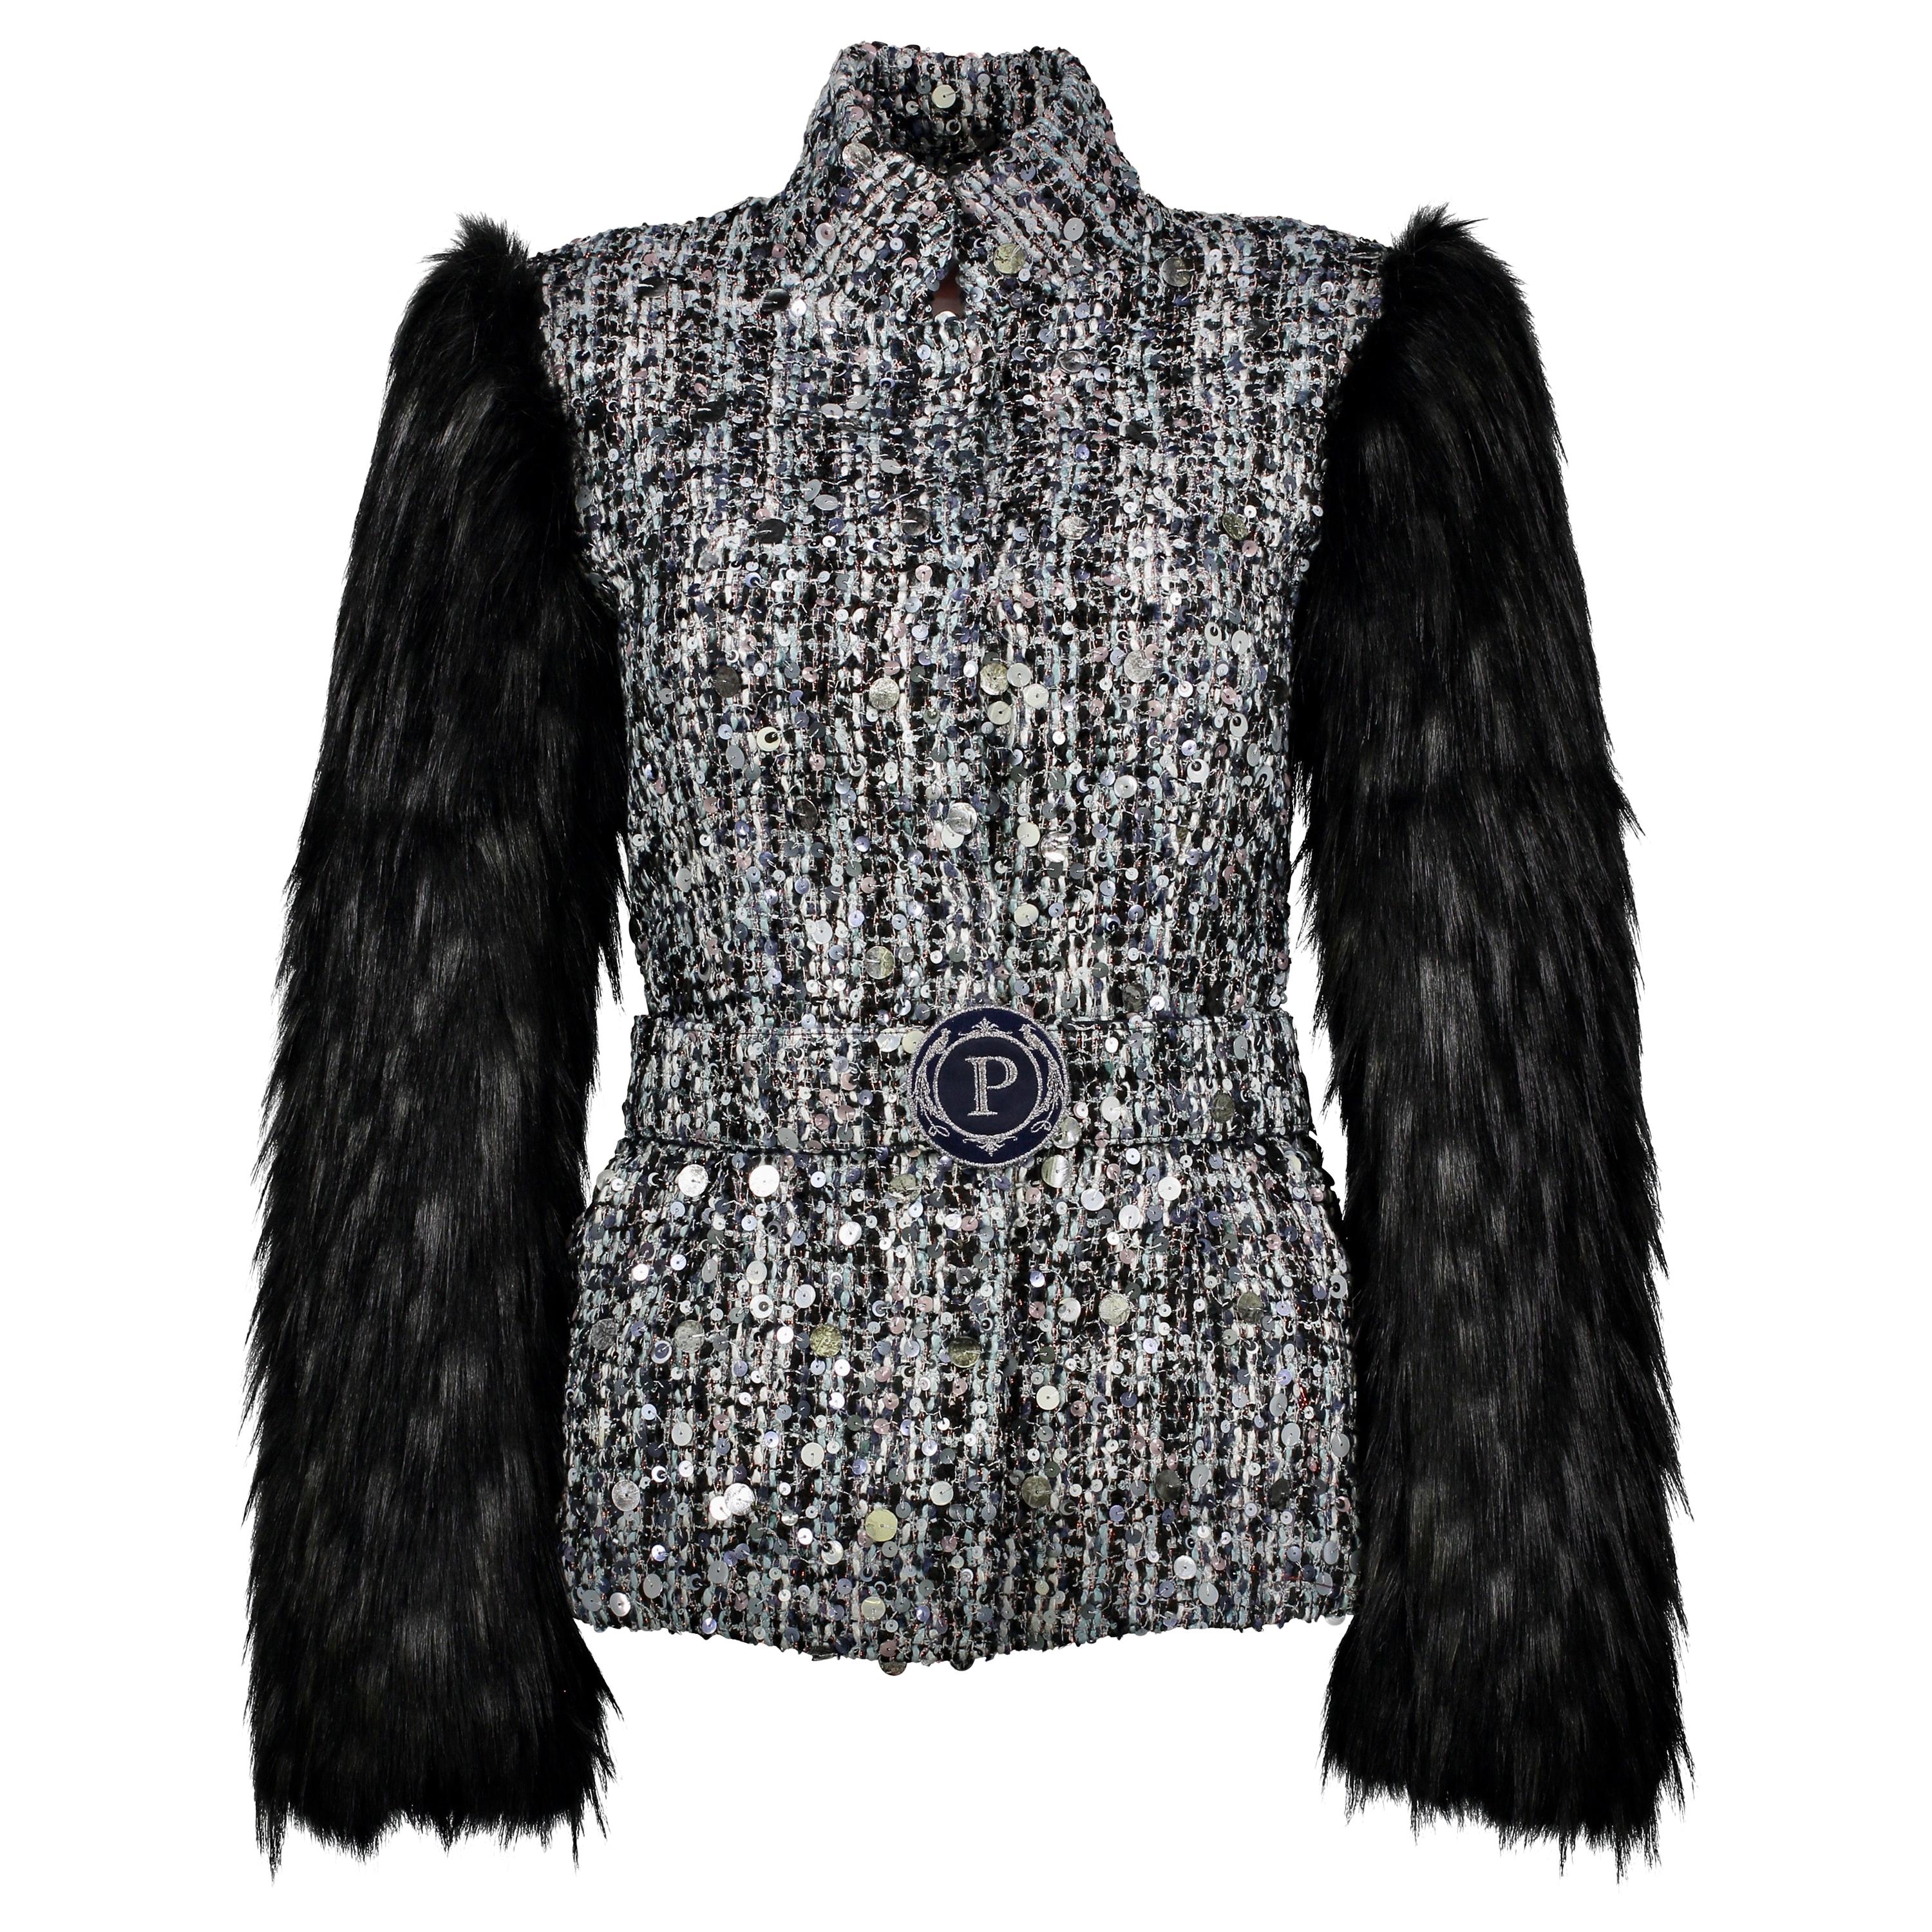 Pelush Black Tweed Jacket With Sequins and Faux Fur Fox Sleeves - X Small